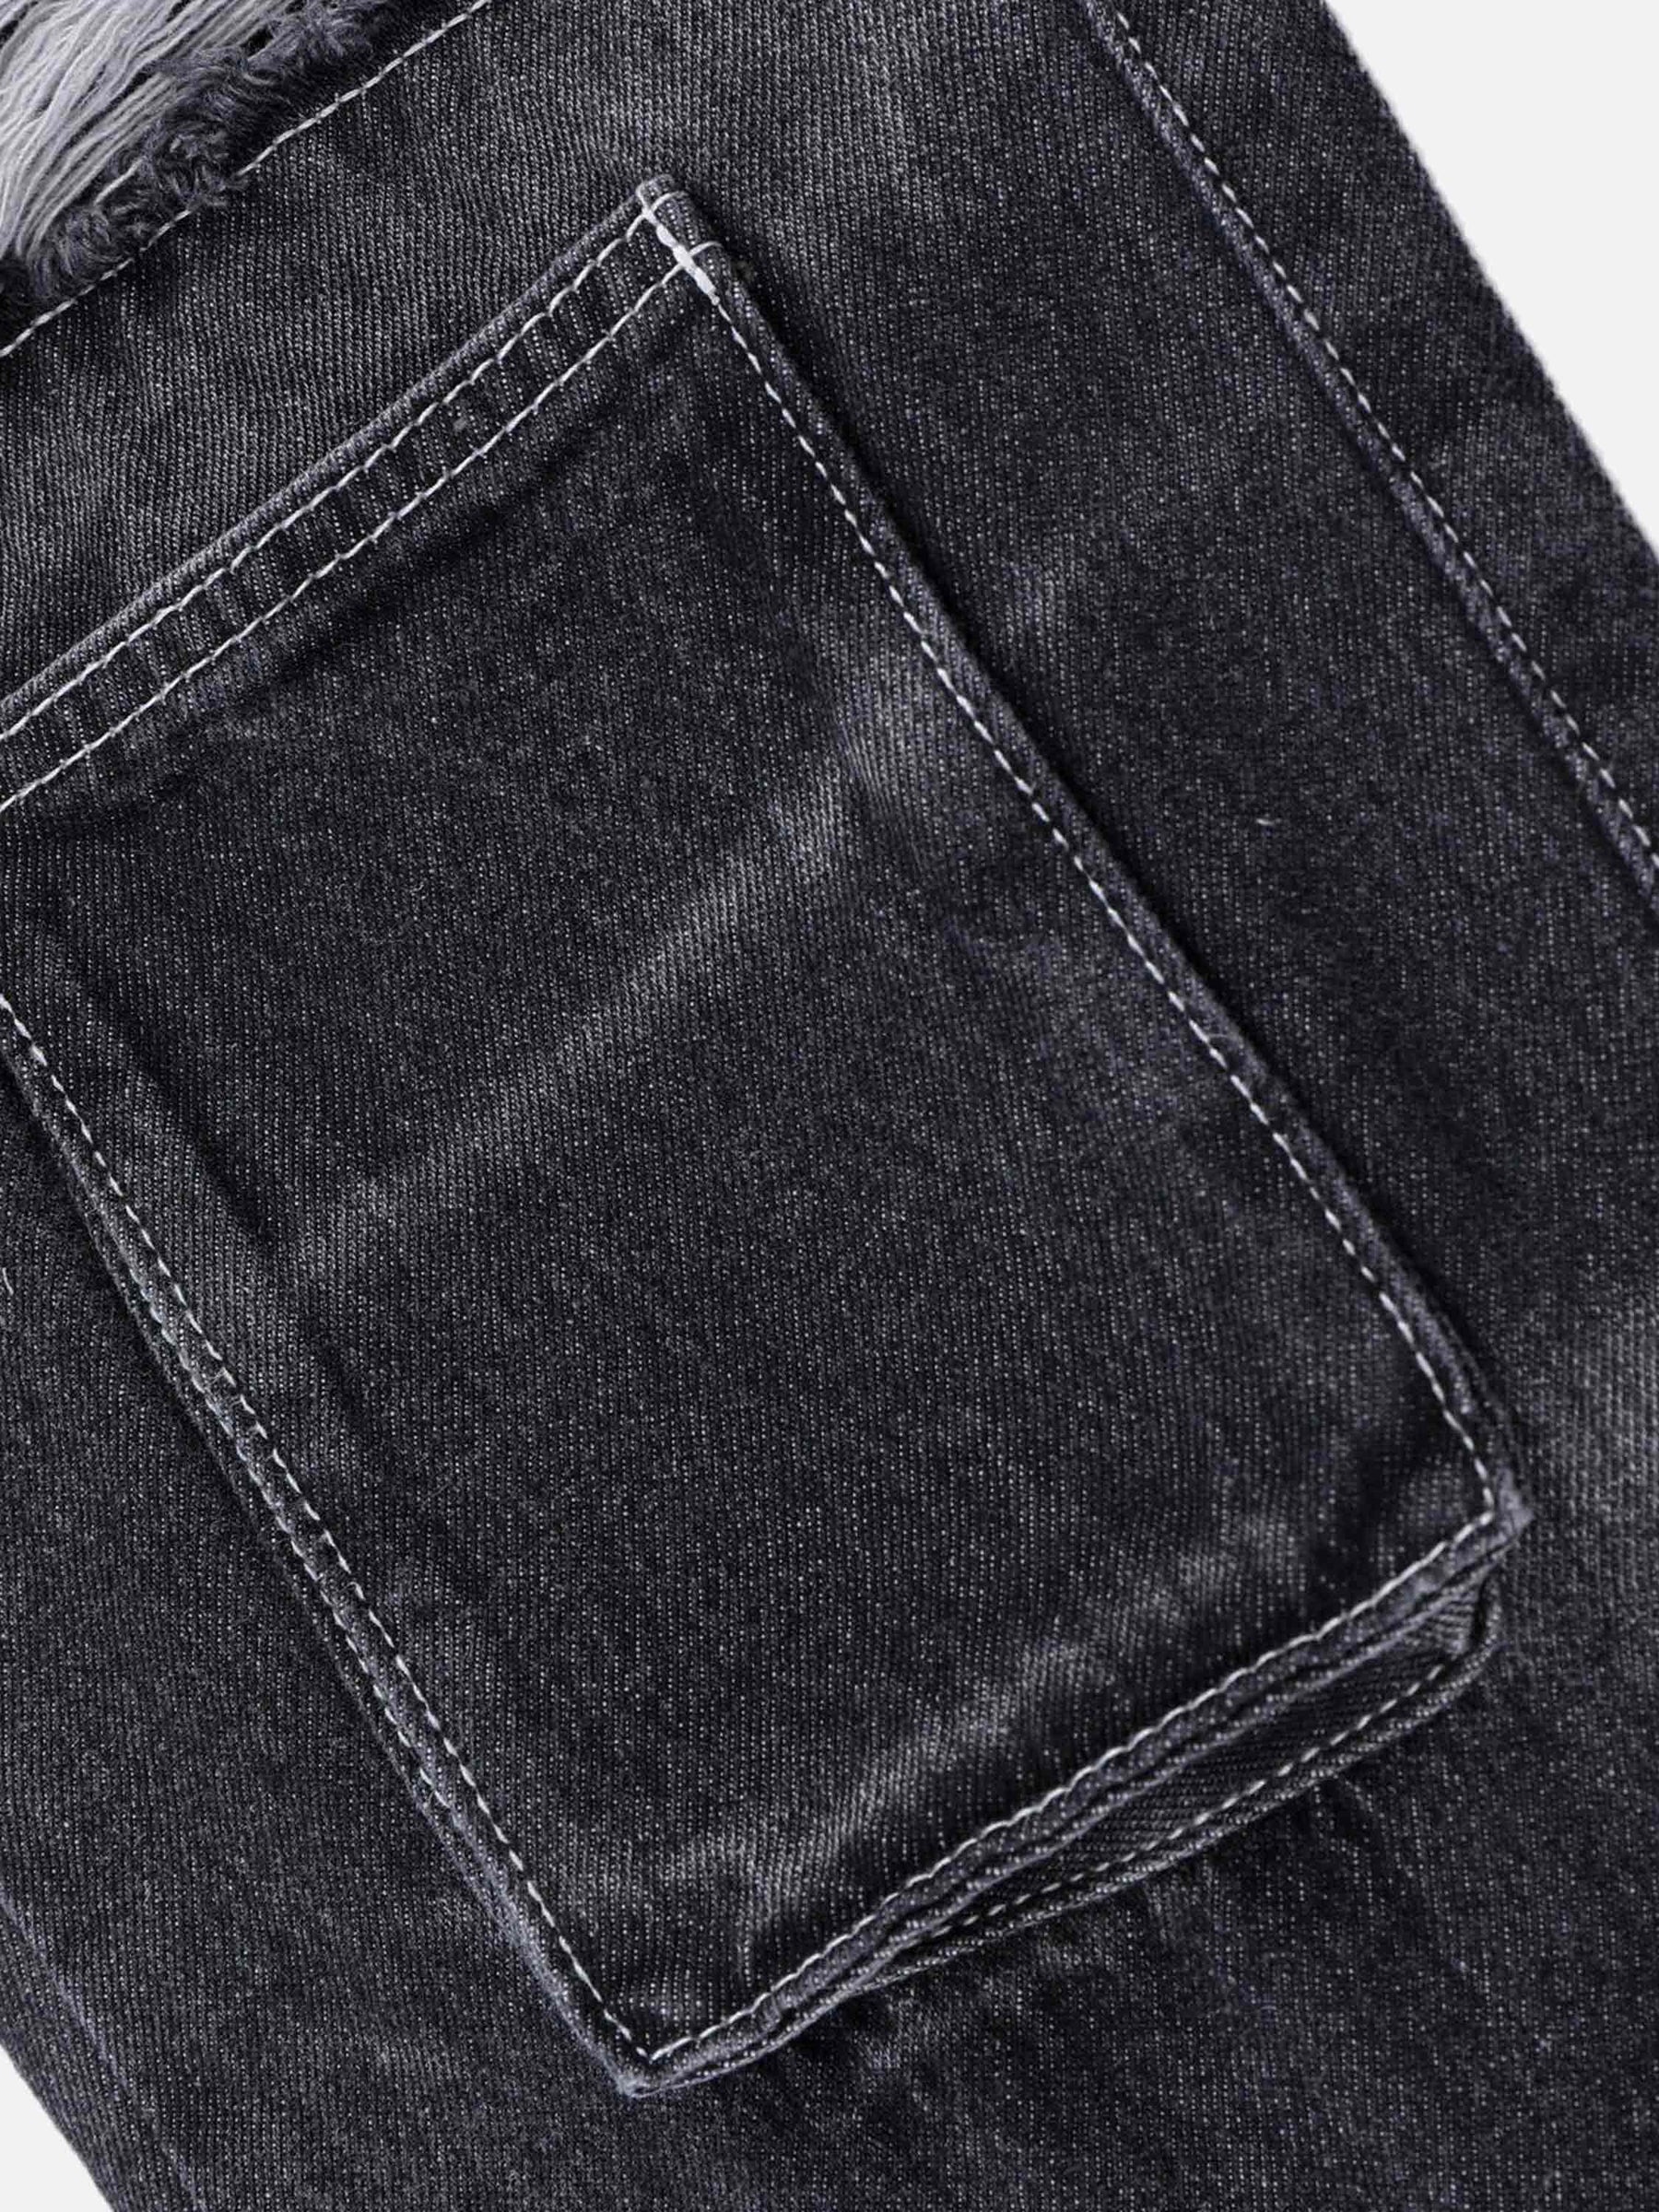 LUXENFY™ - European And American Hip-hop Washed And Torn Jeans luxenfy.com